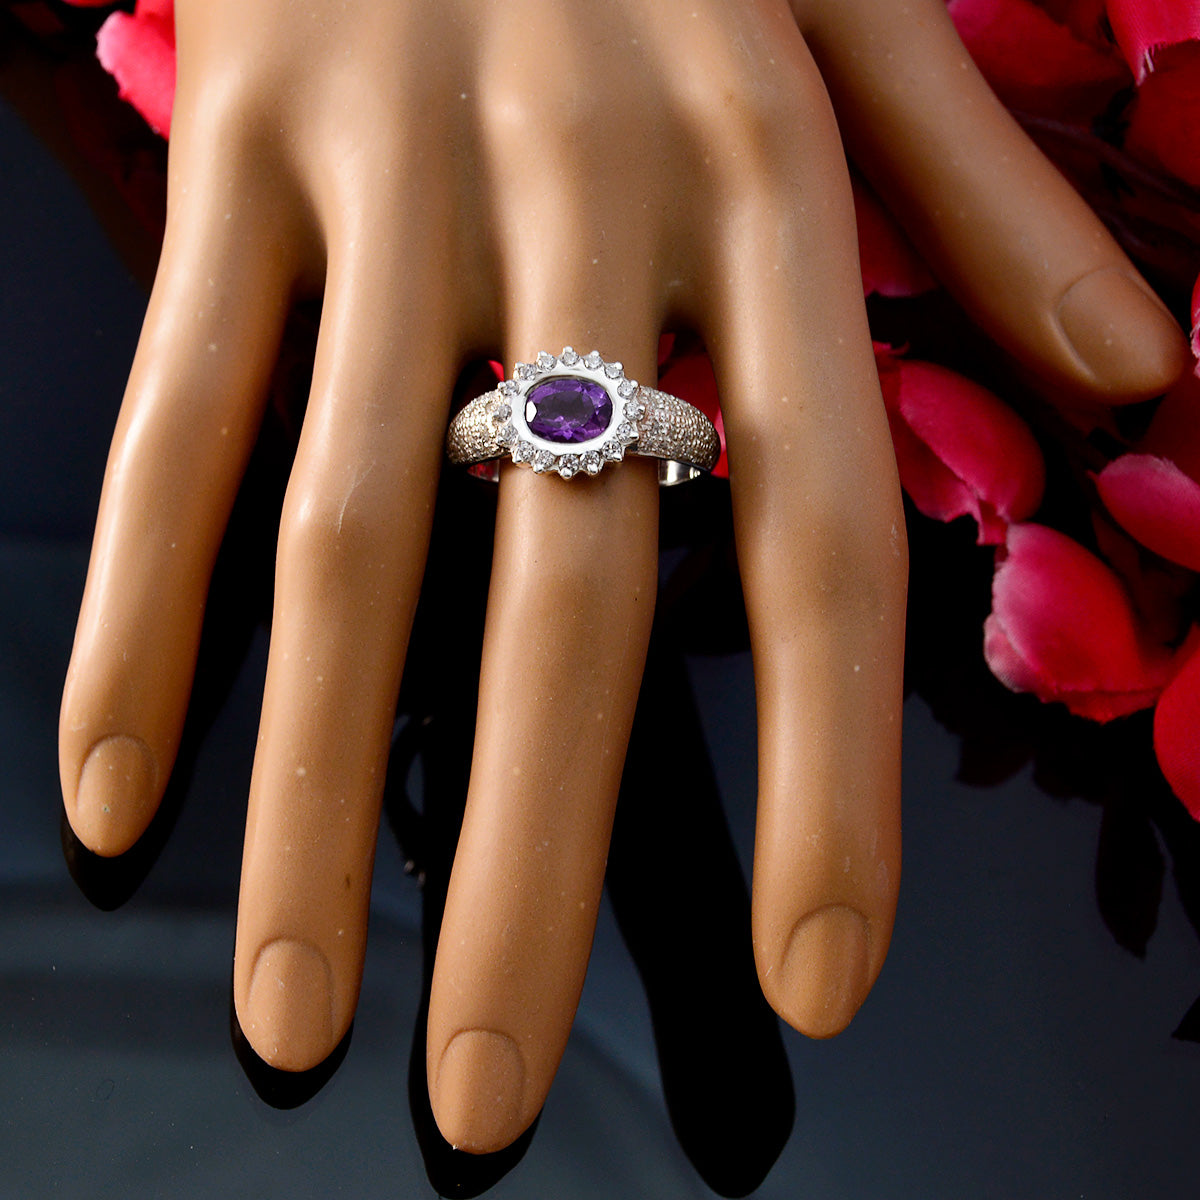 Seductive Stone Amethyst Sterling Silver Ring Frinendship Day Gift